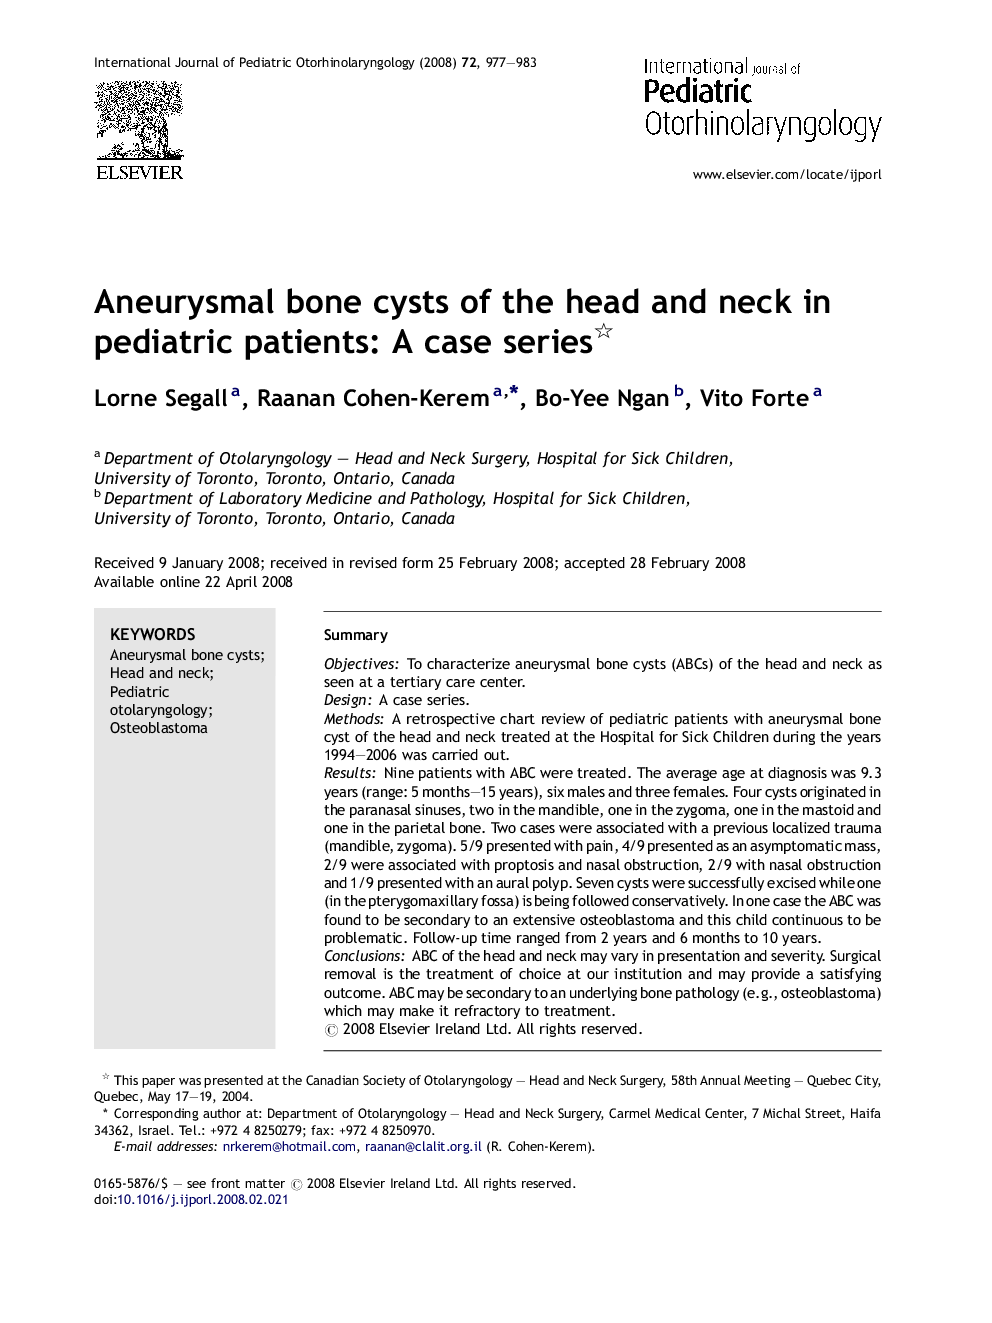 Aneurysmal bone cysts of the head and neck in pediatric patients: A case series 